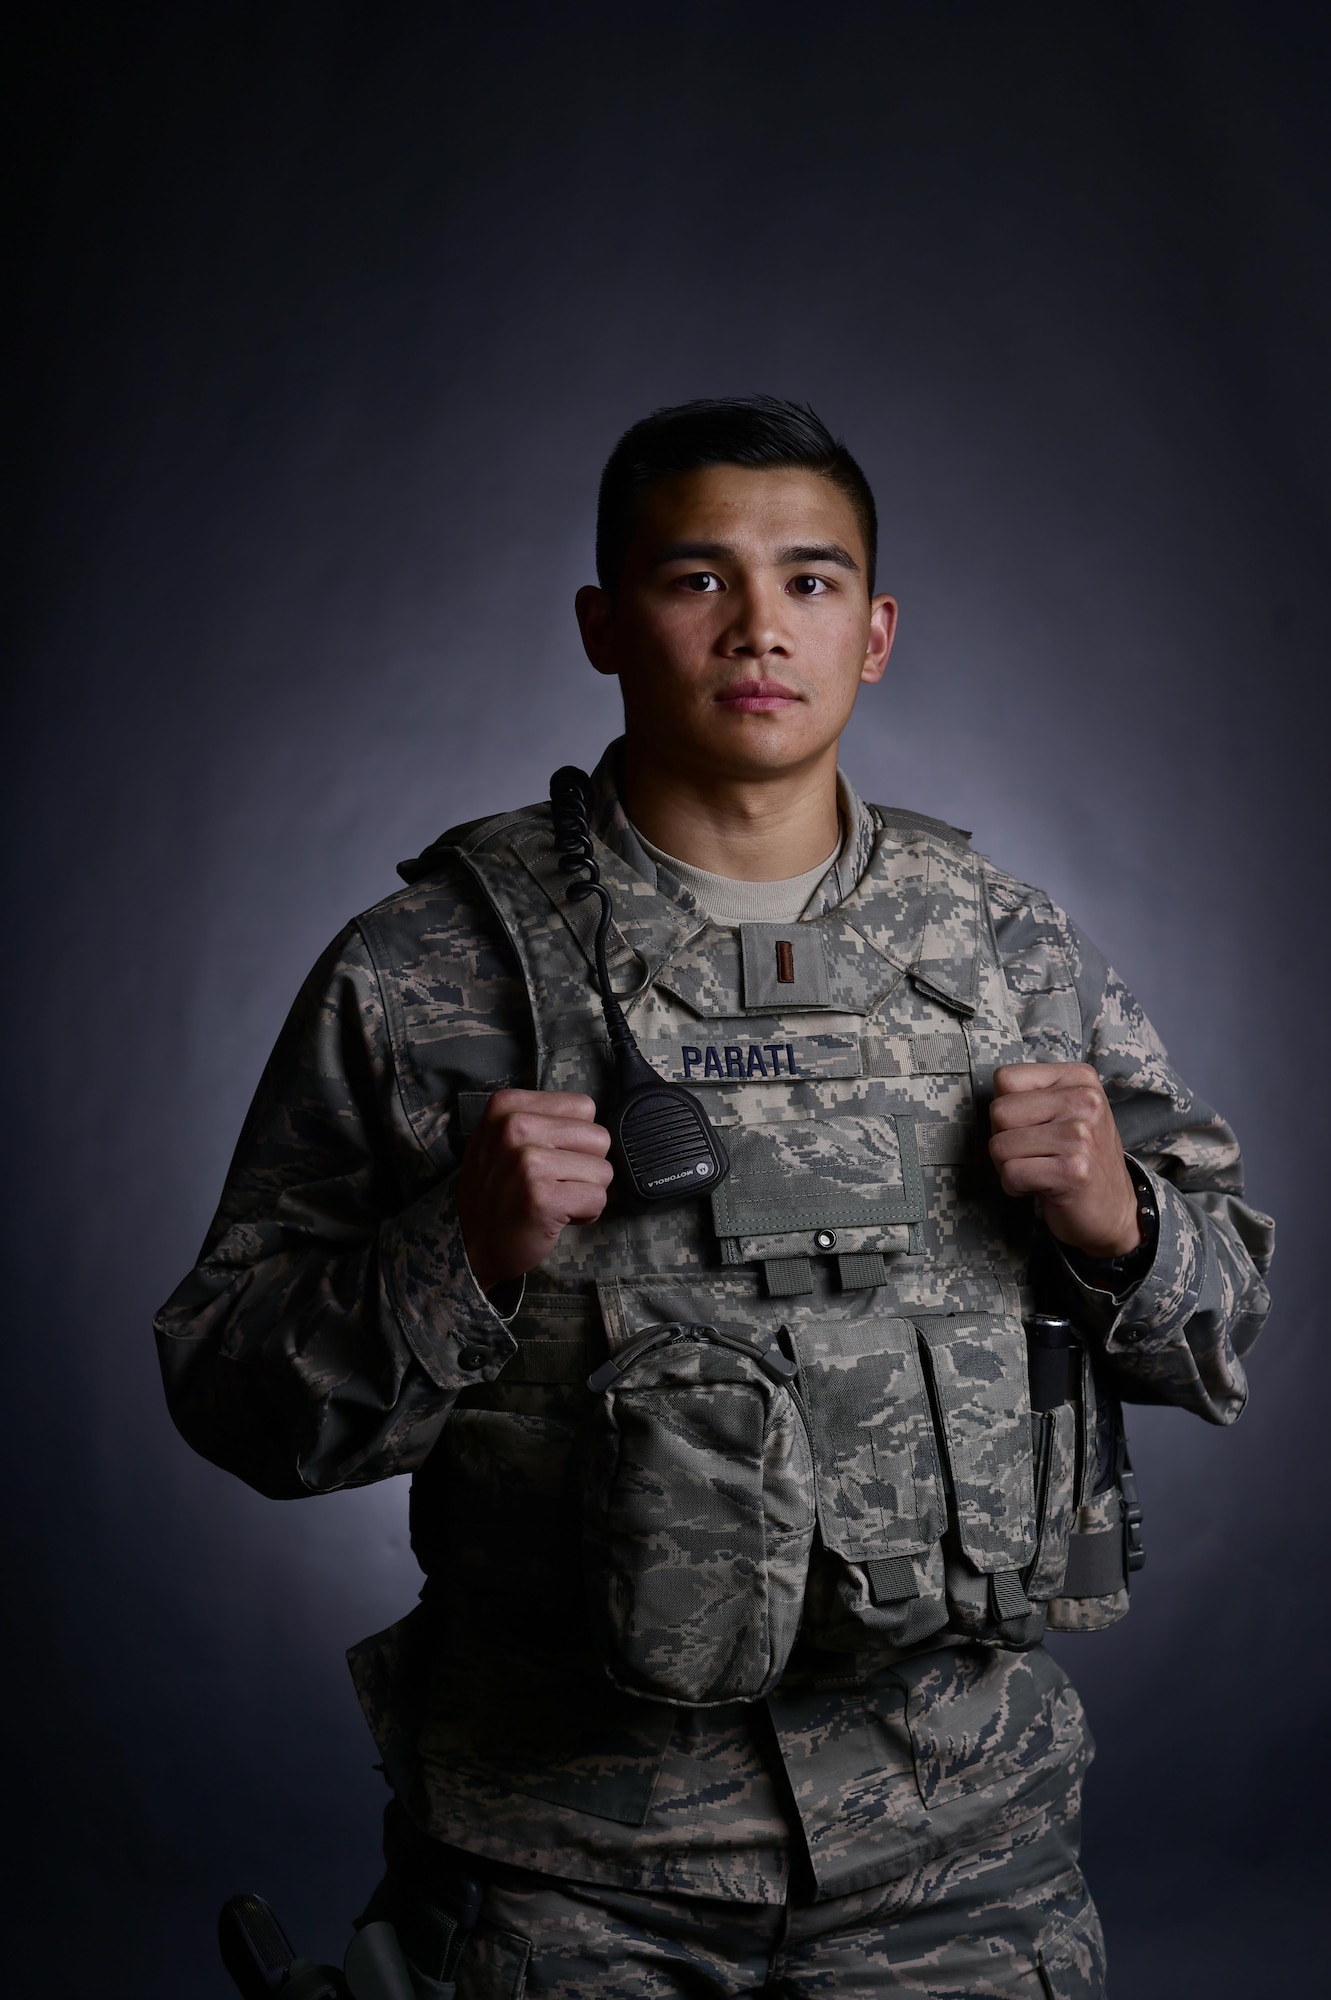 U.S. Air Force 2nd Lt. Robert Parati, 355th Security Forces Squadron flight commander, poses for a photo at Davis-Monthan Air Force Base, Ariz., June 14, 2017. Parati was a prior enlisted Airmen who applied to the Air Force Academy and commissioned through their program as a second lieutenant. (U.S. Air Force photo by Senior Airman Ashley N. Steffen)